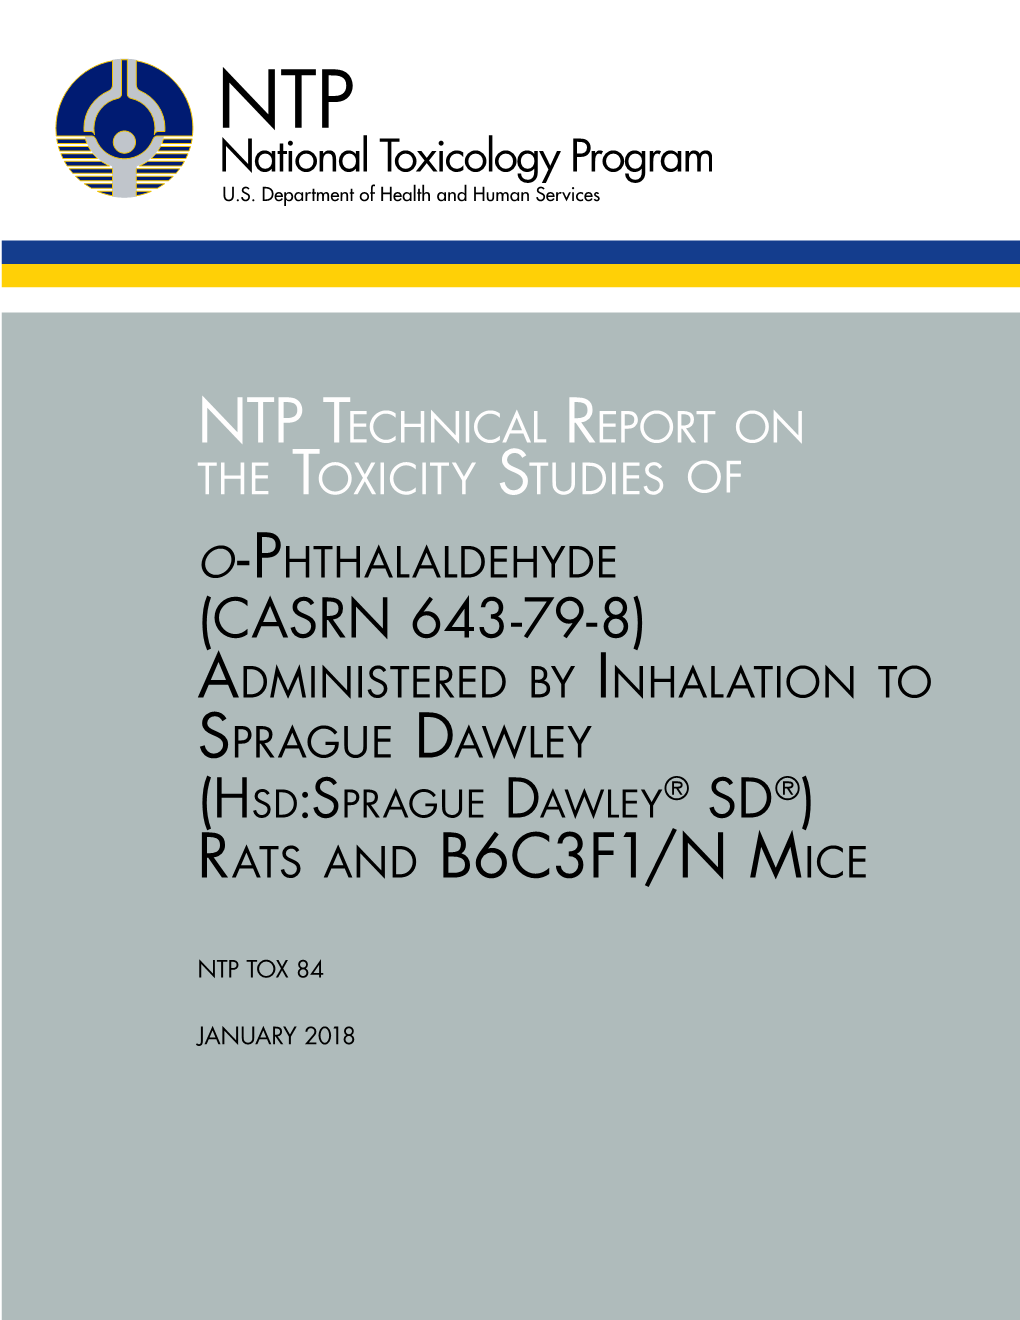 TOX-84: Toxicity Studies of O-Phthalaldehyde (CASRN 643-79